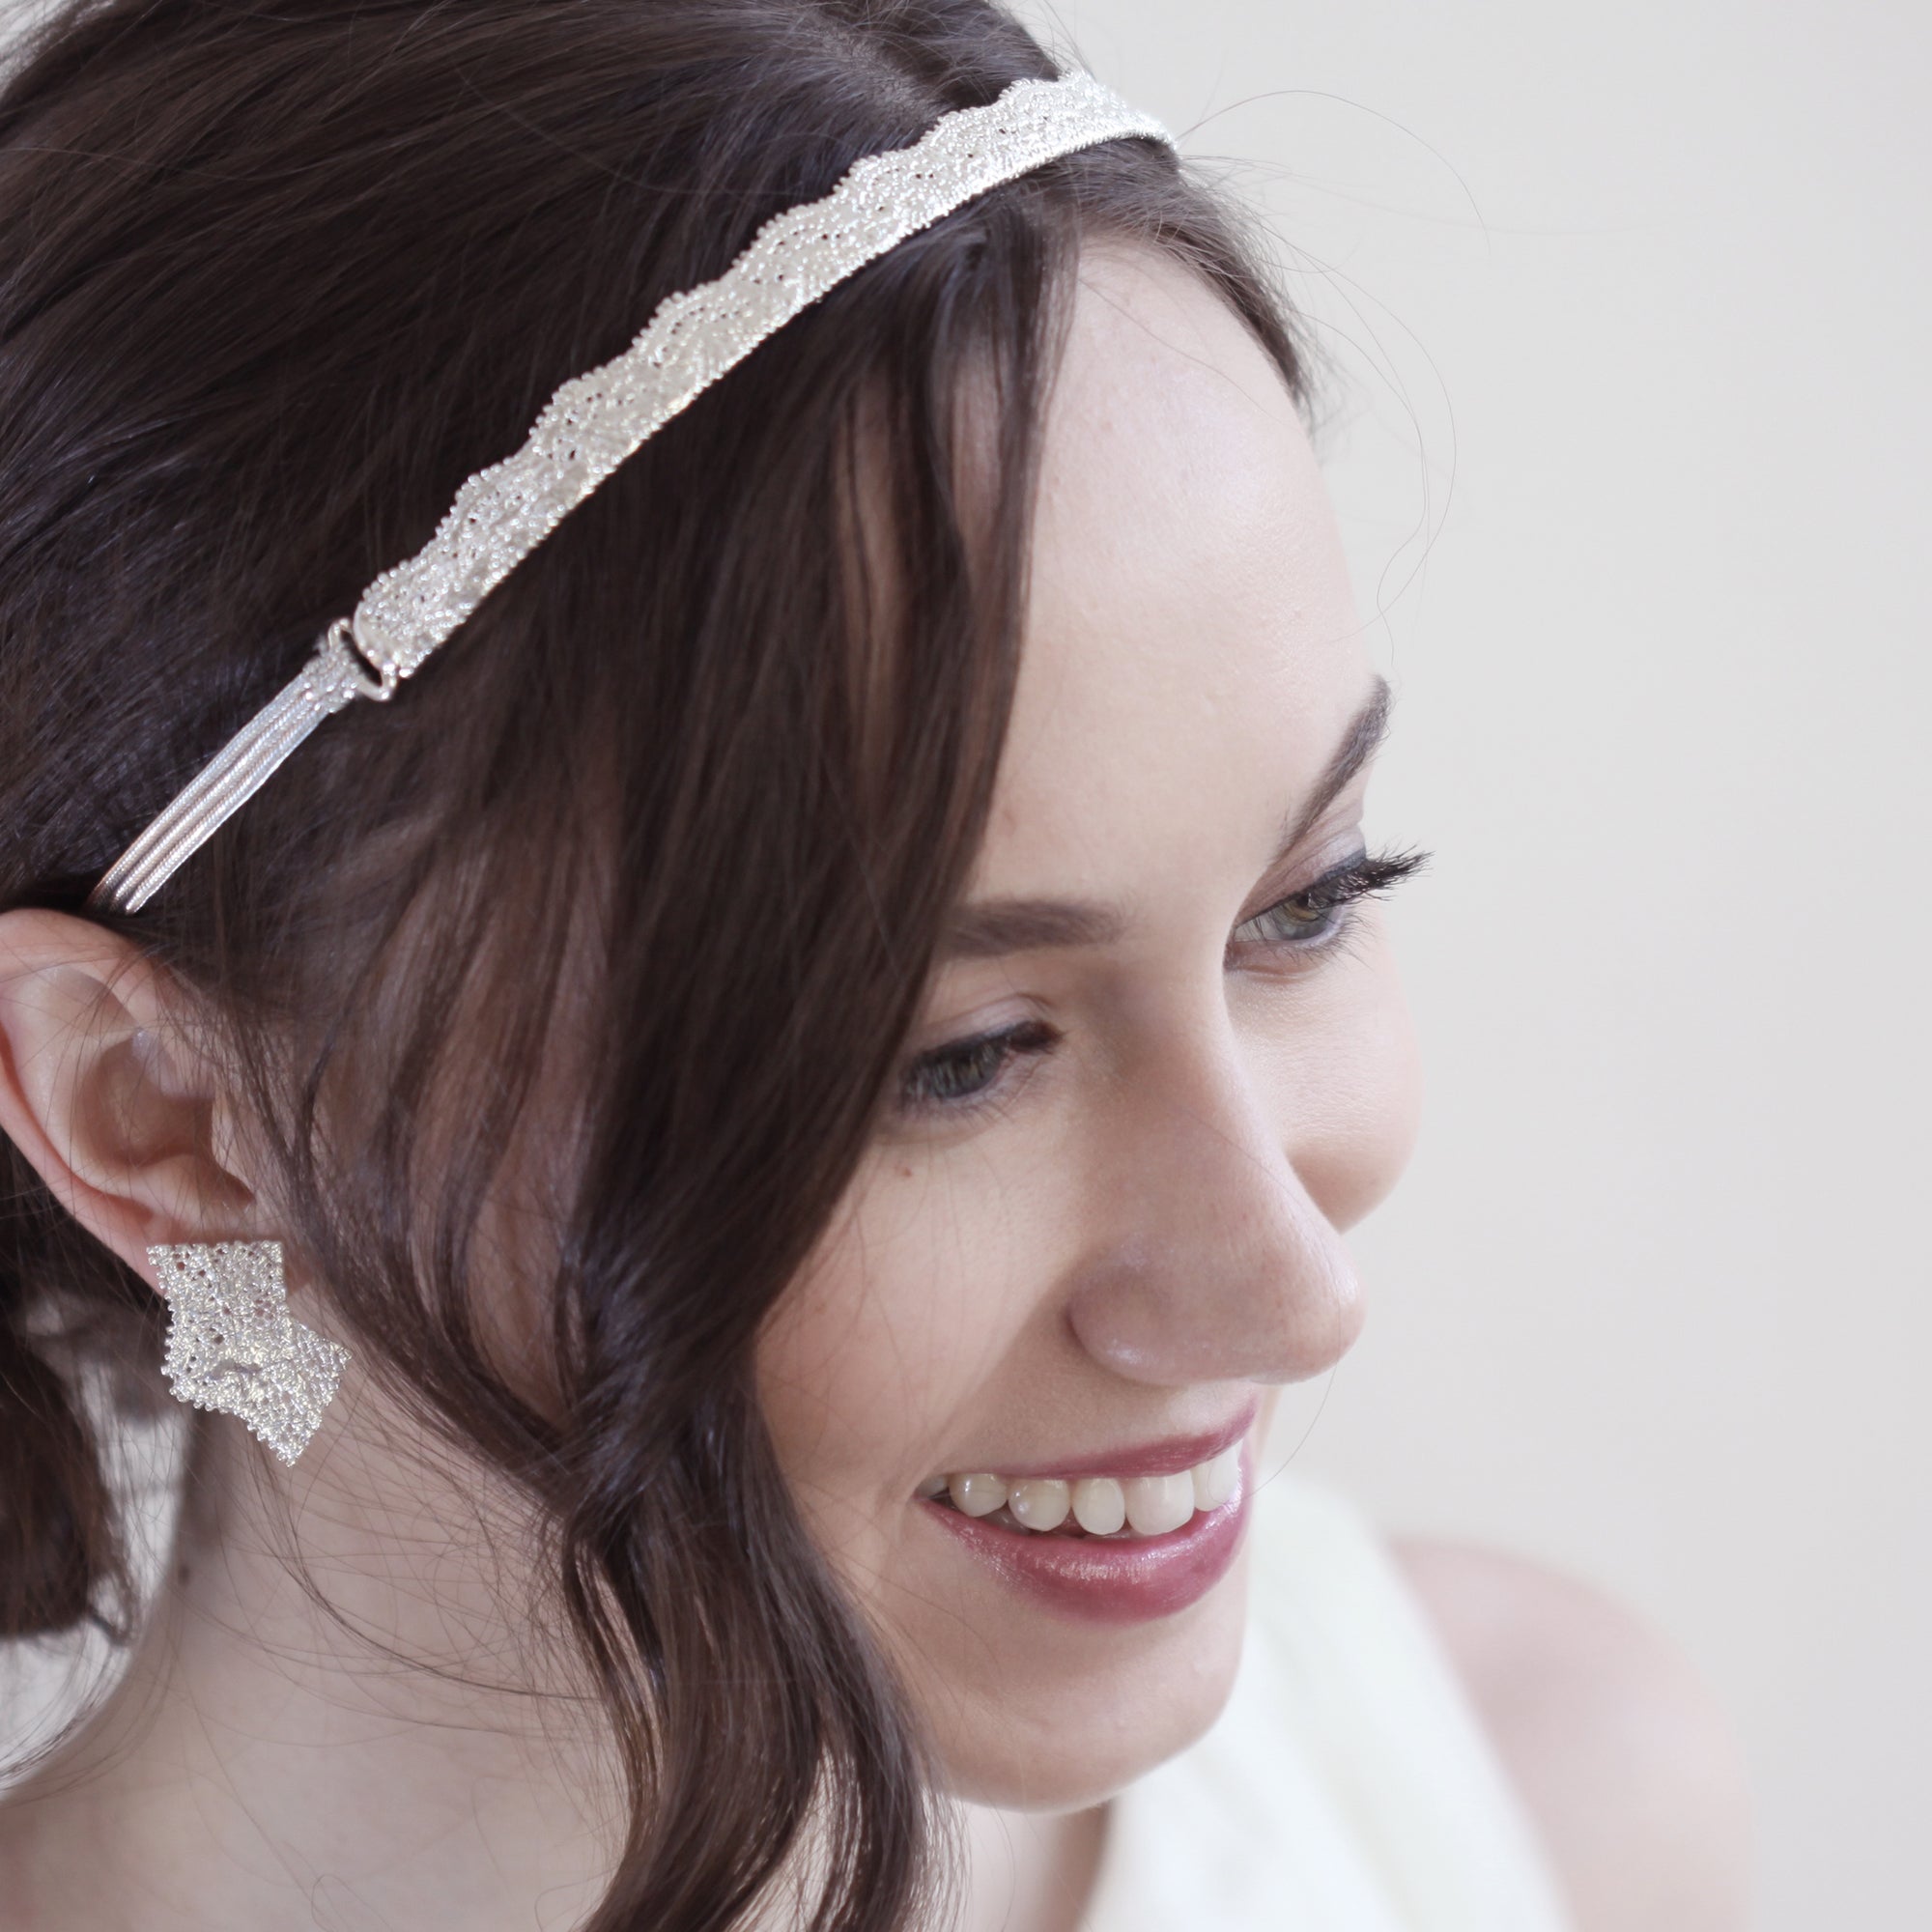 Tiara made from 1920s lace solidified in sterling silver with silk ribbons.